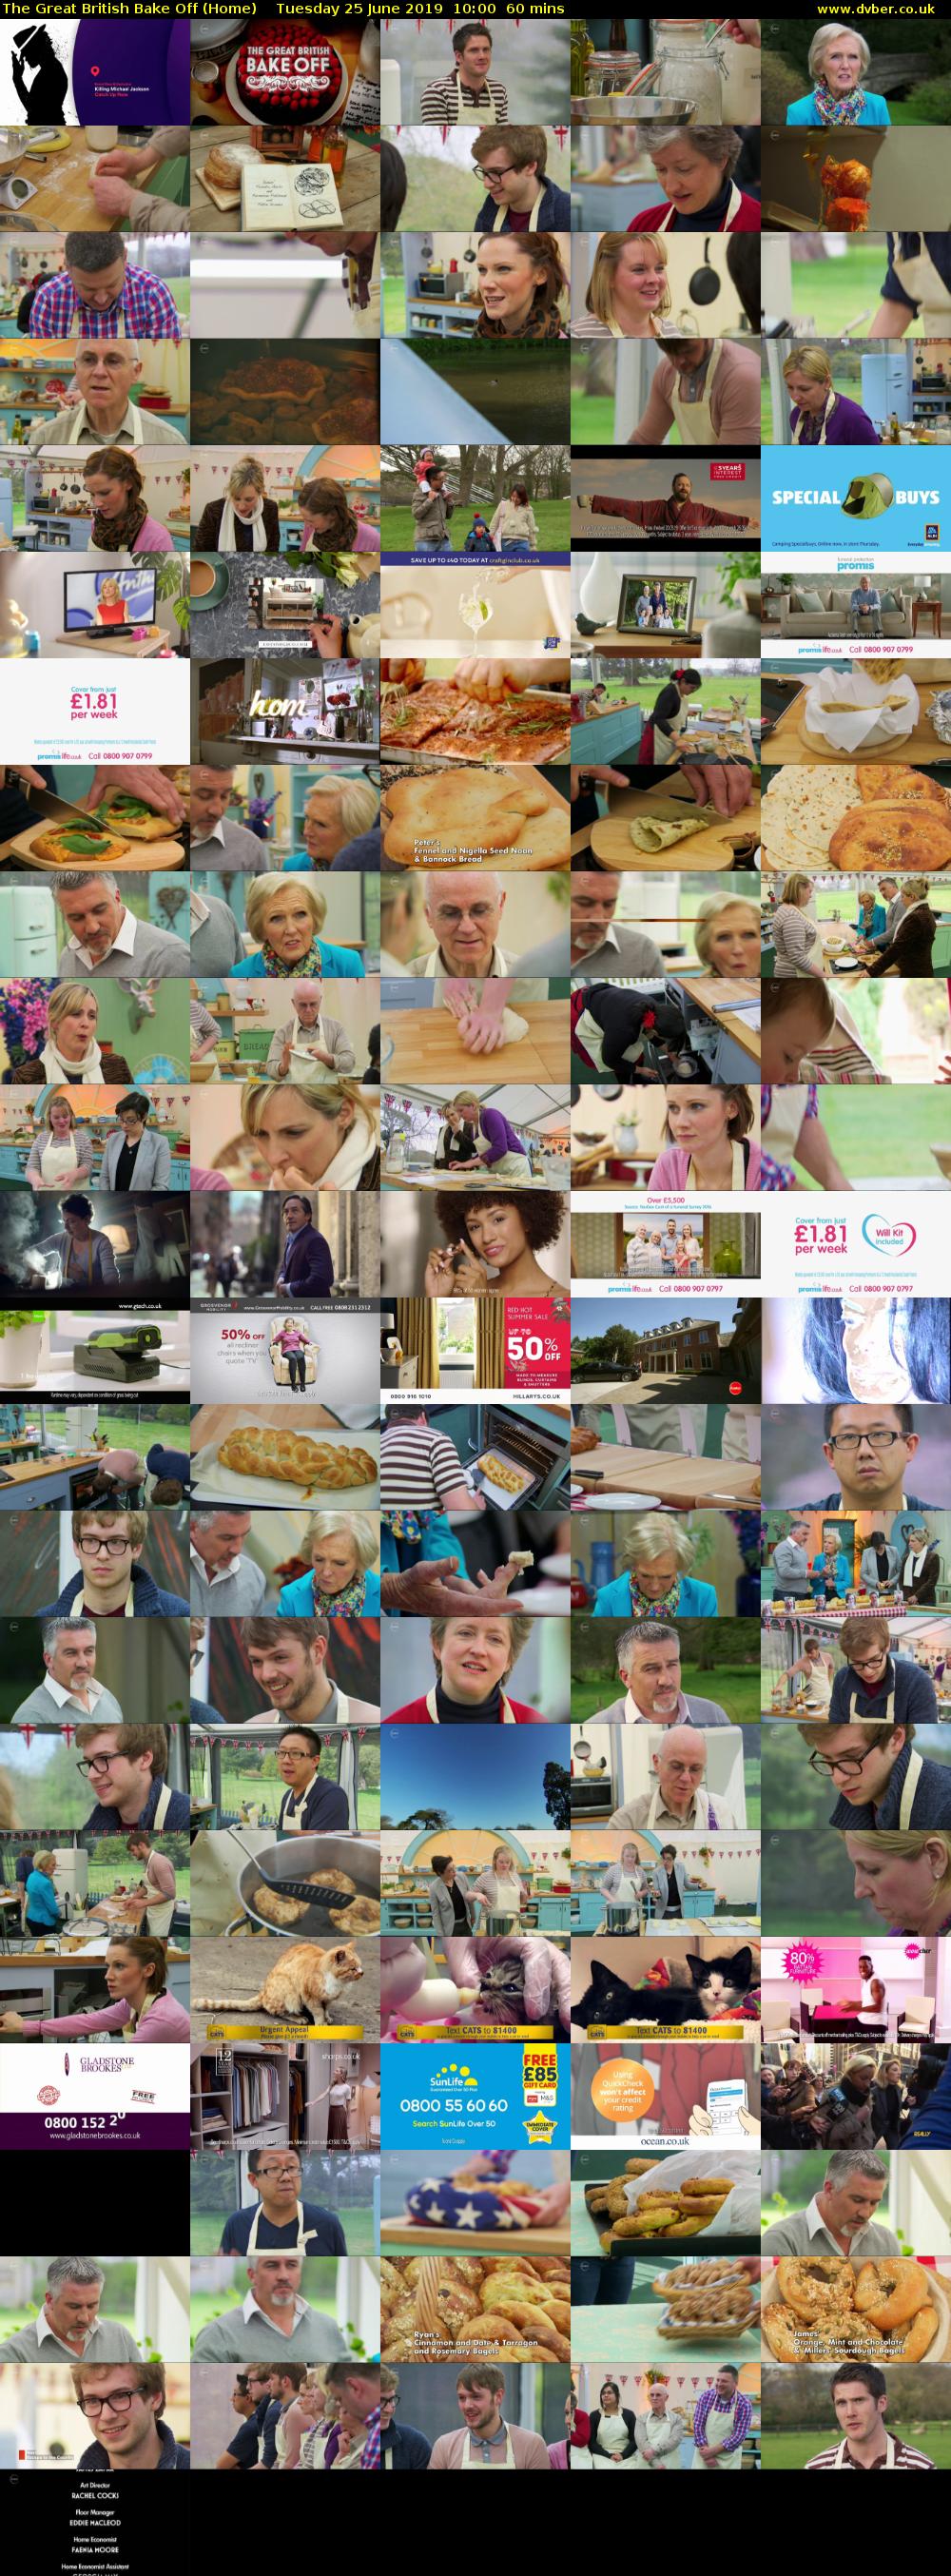 The Great British Bake Off (Home) Tuesday 25 June 2019 10:00 - 11:00